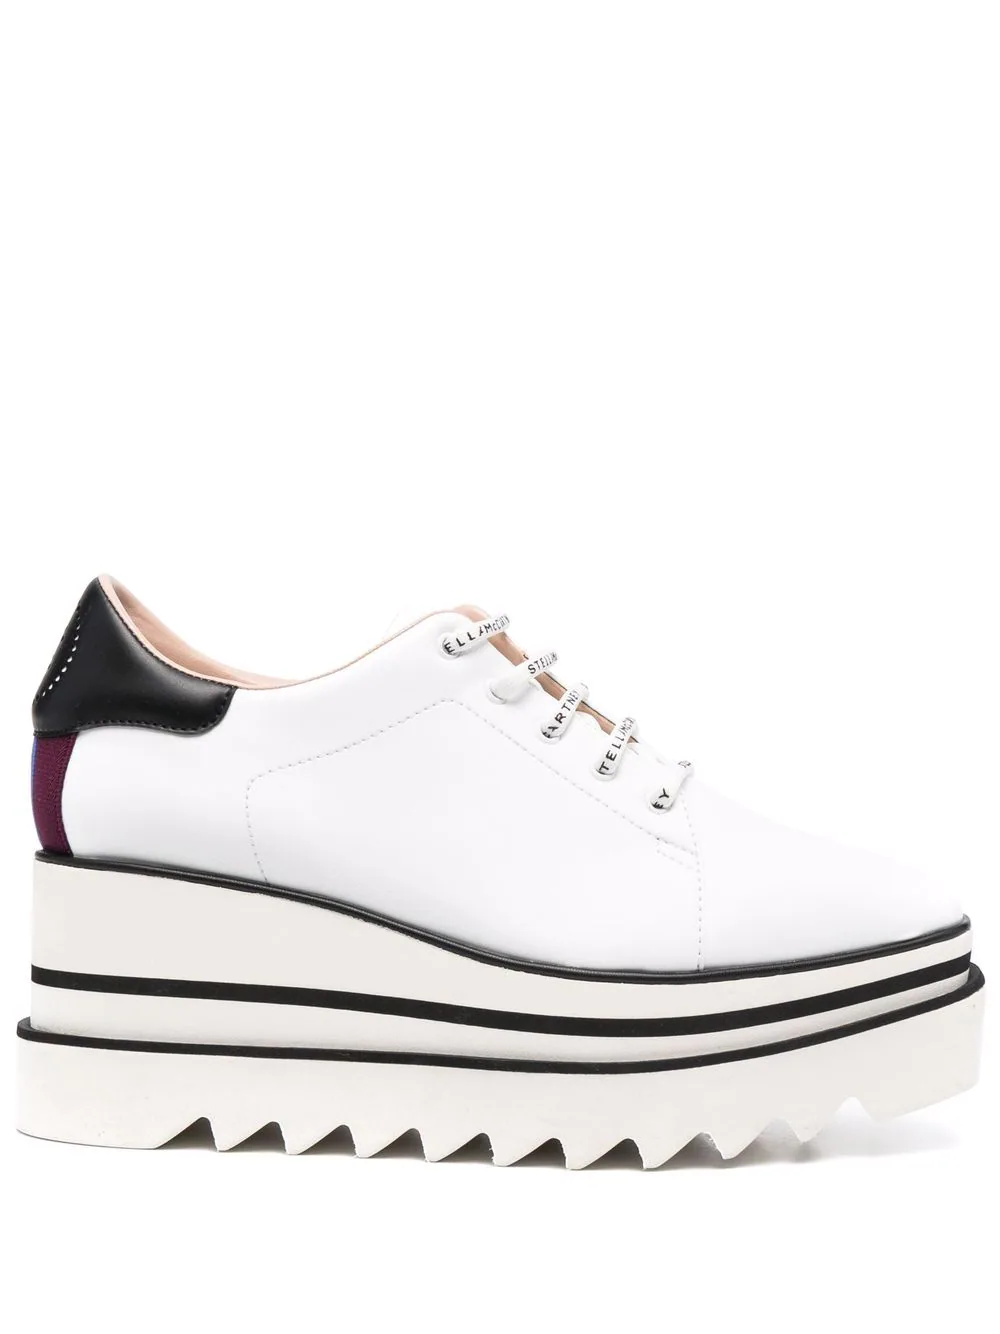 Stella Mccartney Elyse 80mm Trainers With Non-slip Sole In White